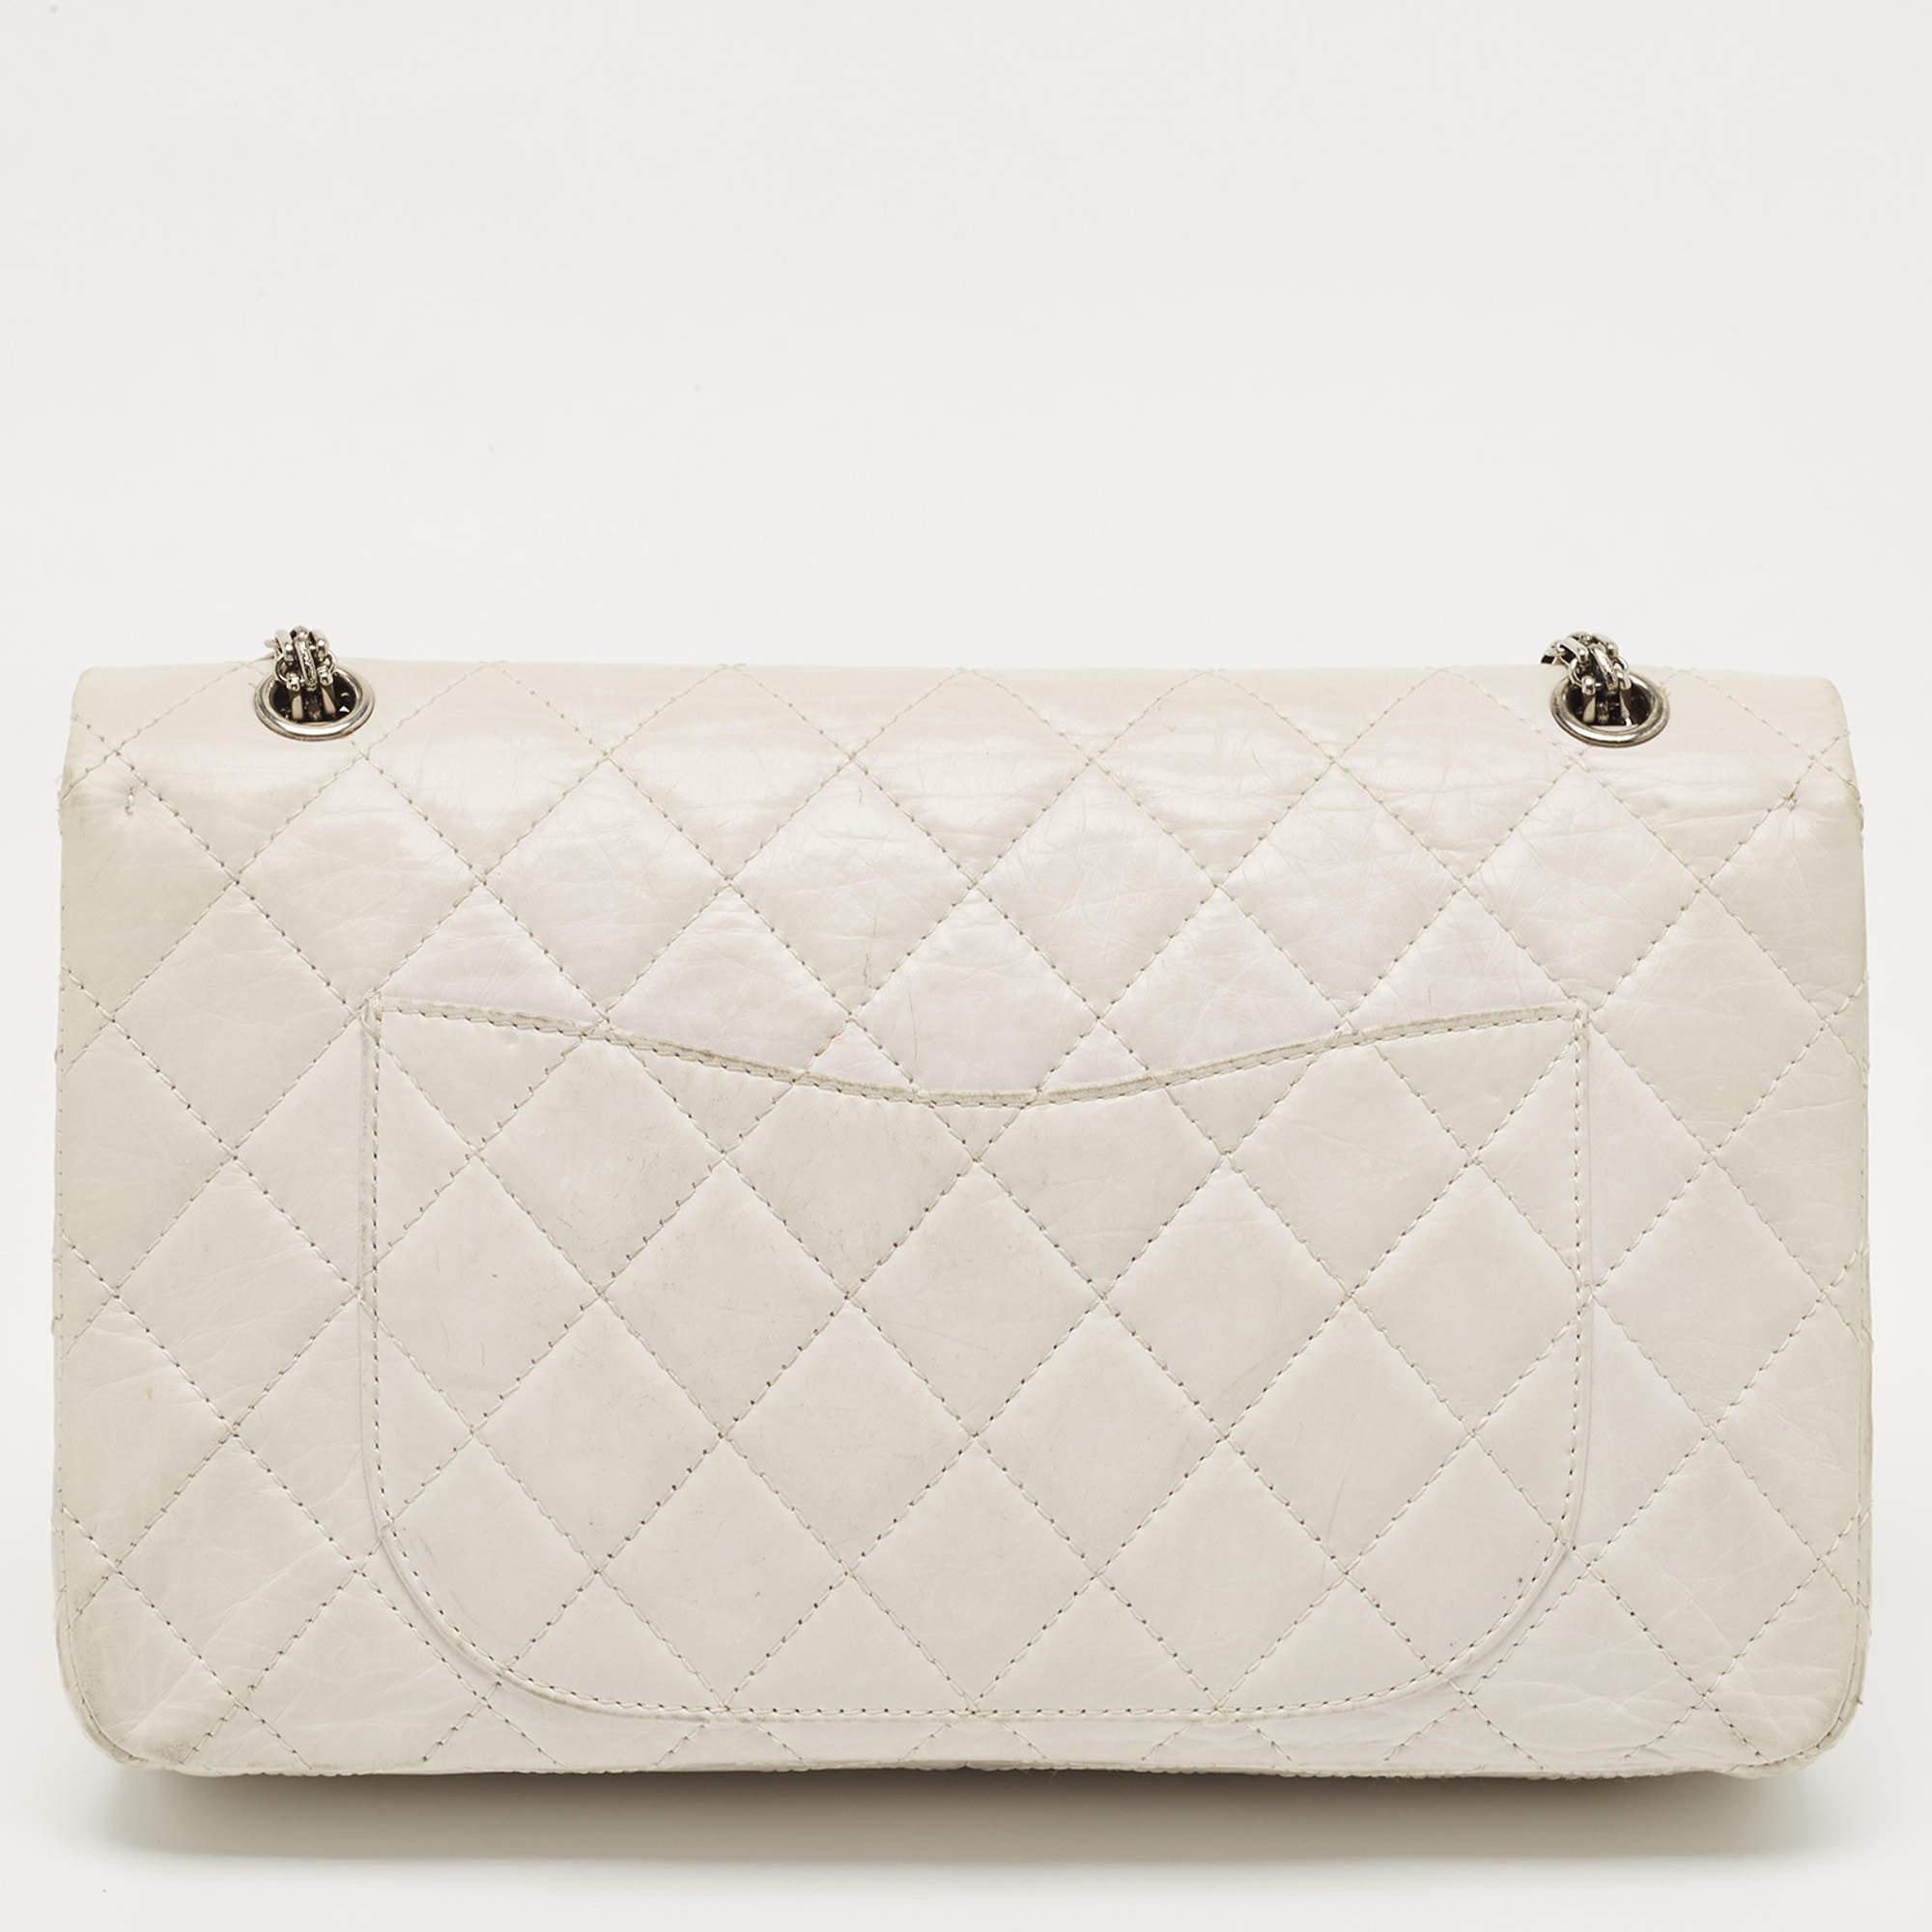 Women's Chanel White Quilted Aged Leather Reissue 2.55 Classic 227 Flap Bag For Sale